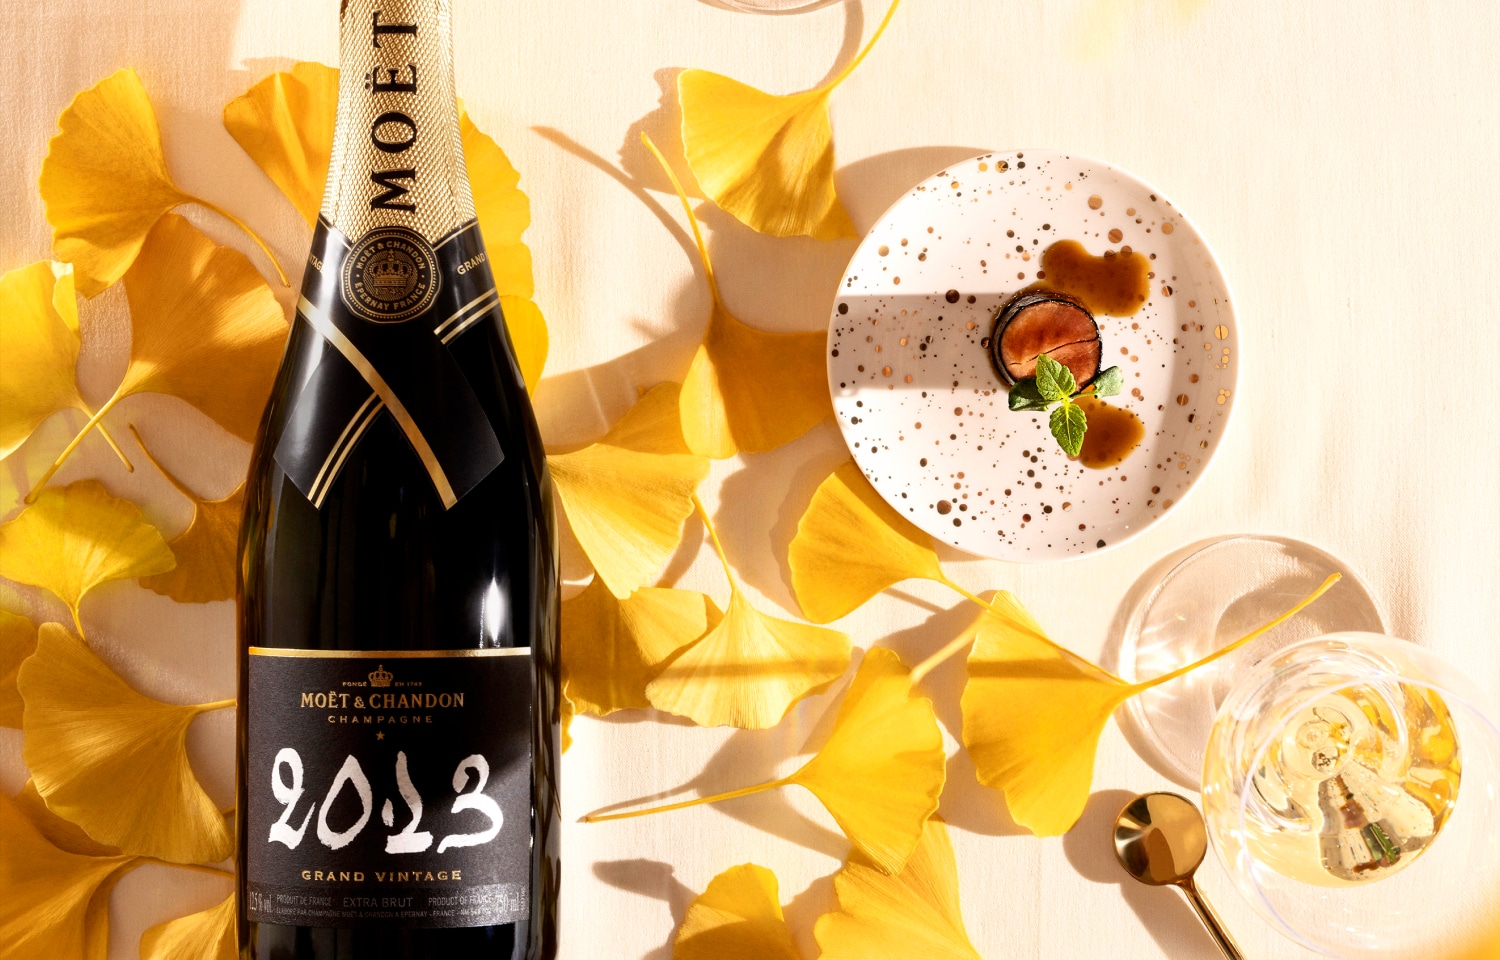 Discover our Champagnes